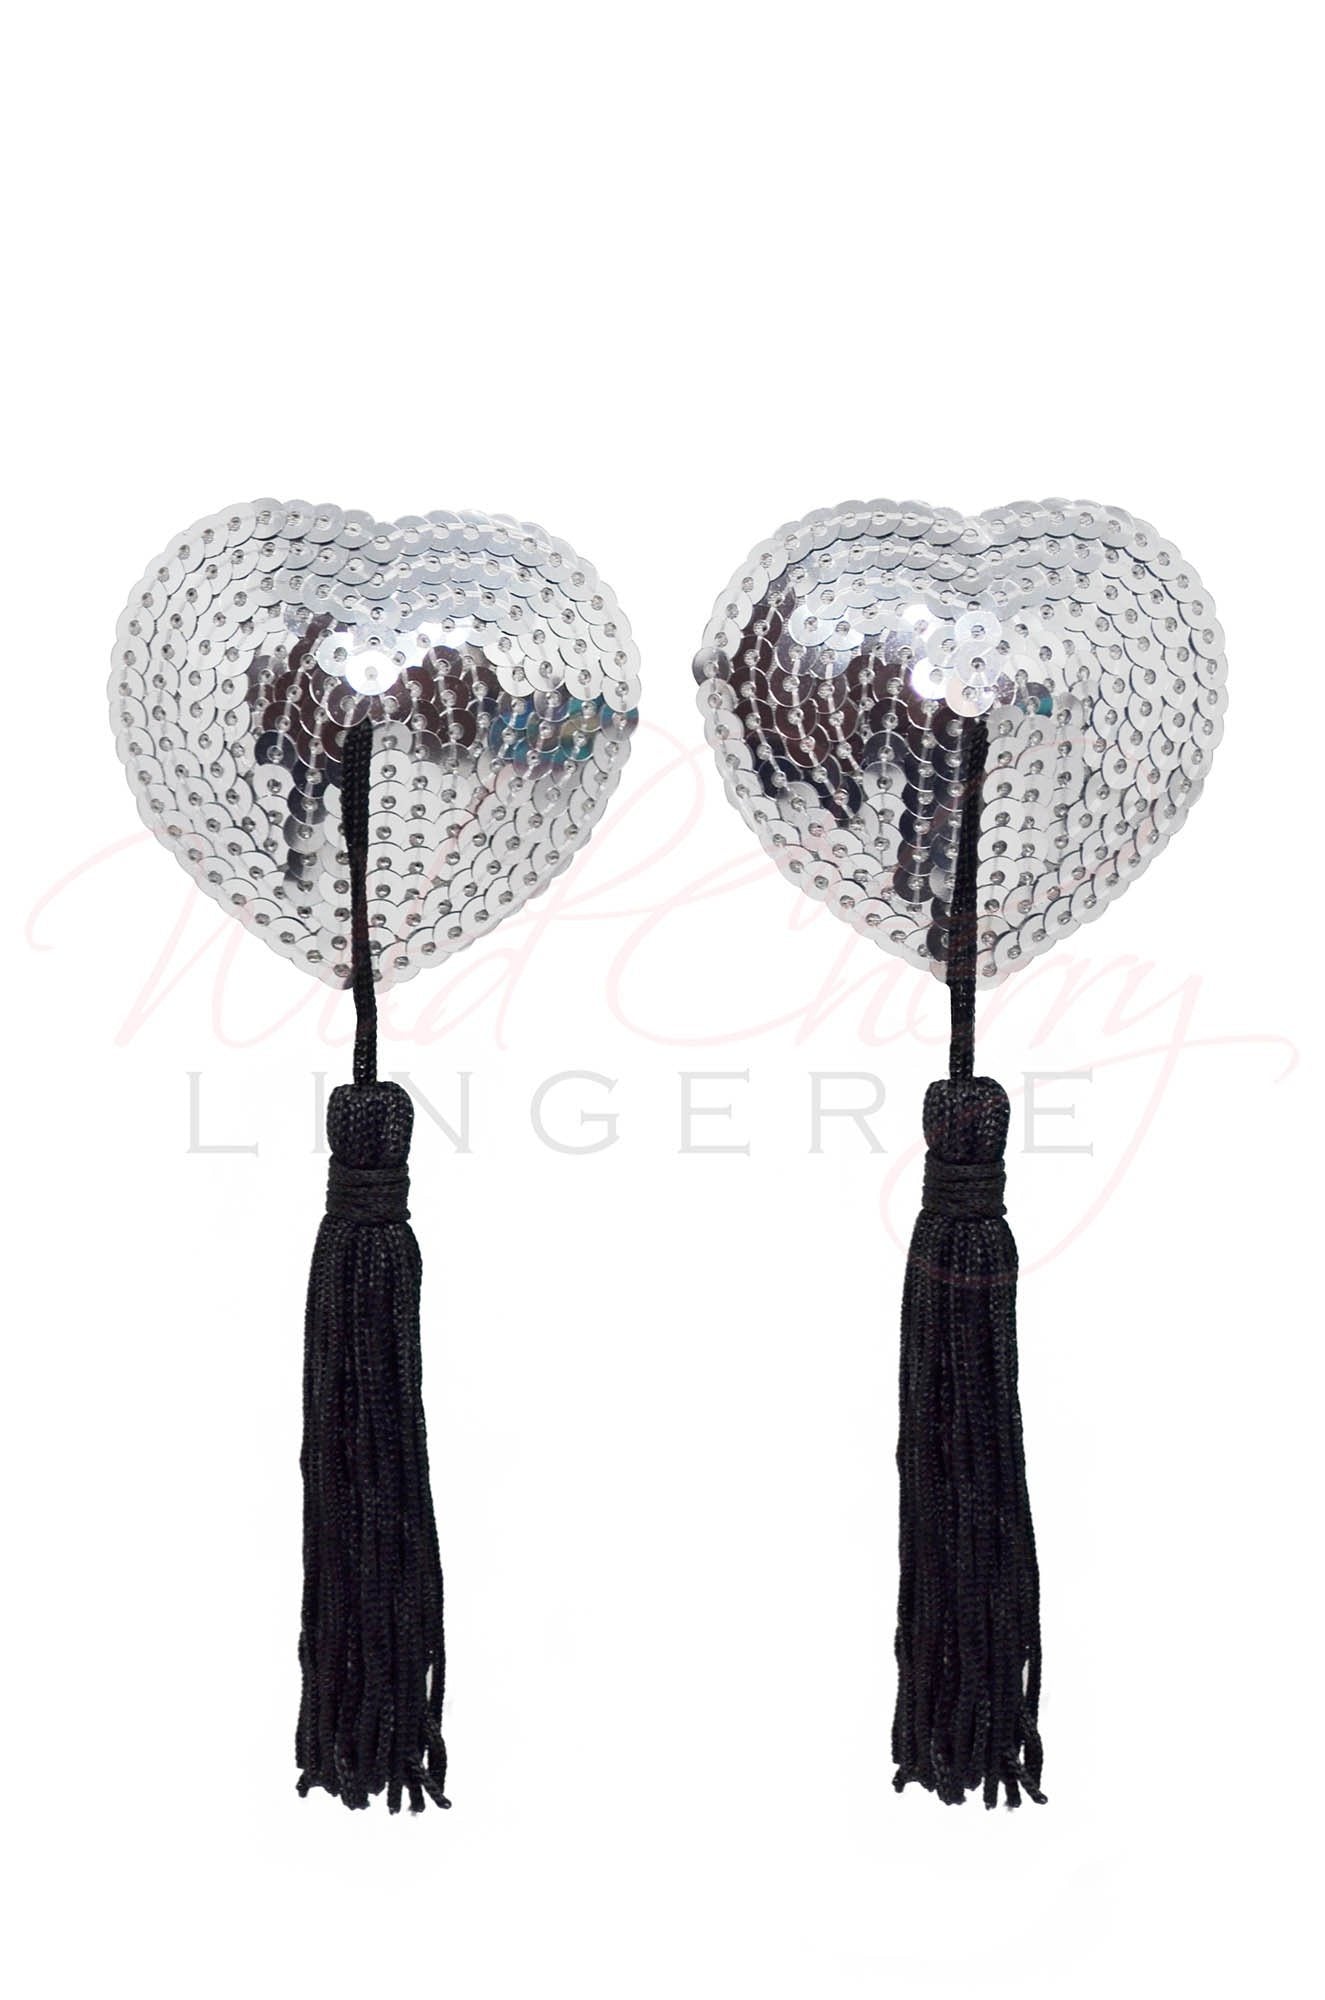 Sequin Heart Pasties with Tassels, Accessories, Wild Cherry Lingerie - Wild Cherry Lingerie